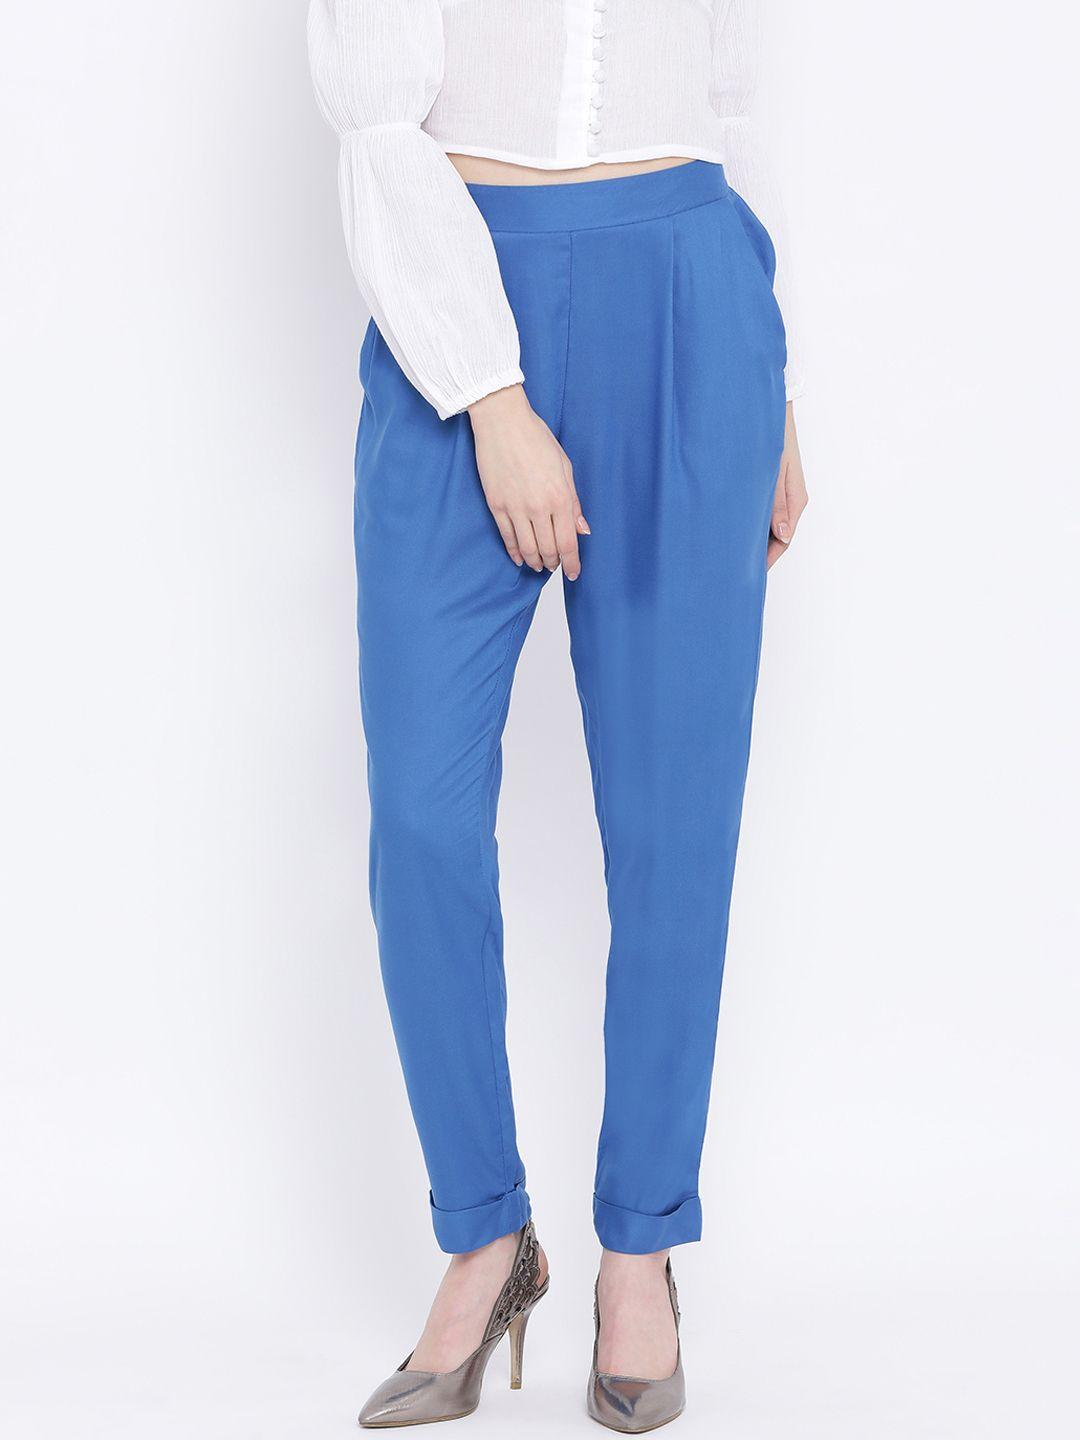 oxolloxo-women-blue-regular-fit-solid-cigarette-trousers